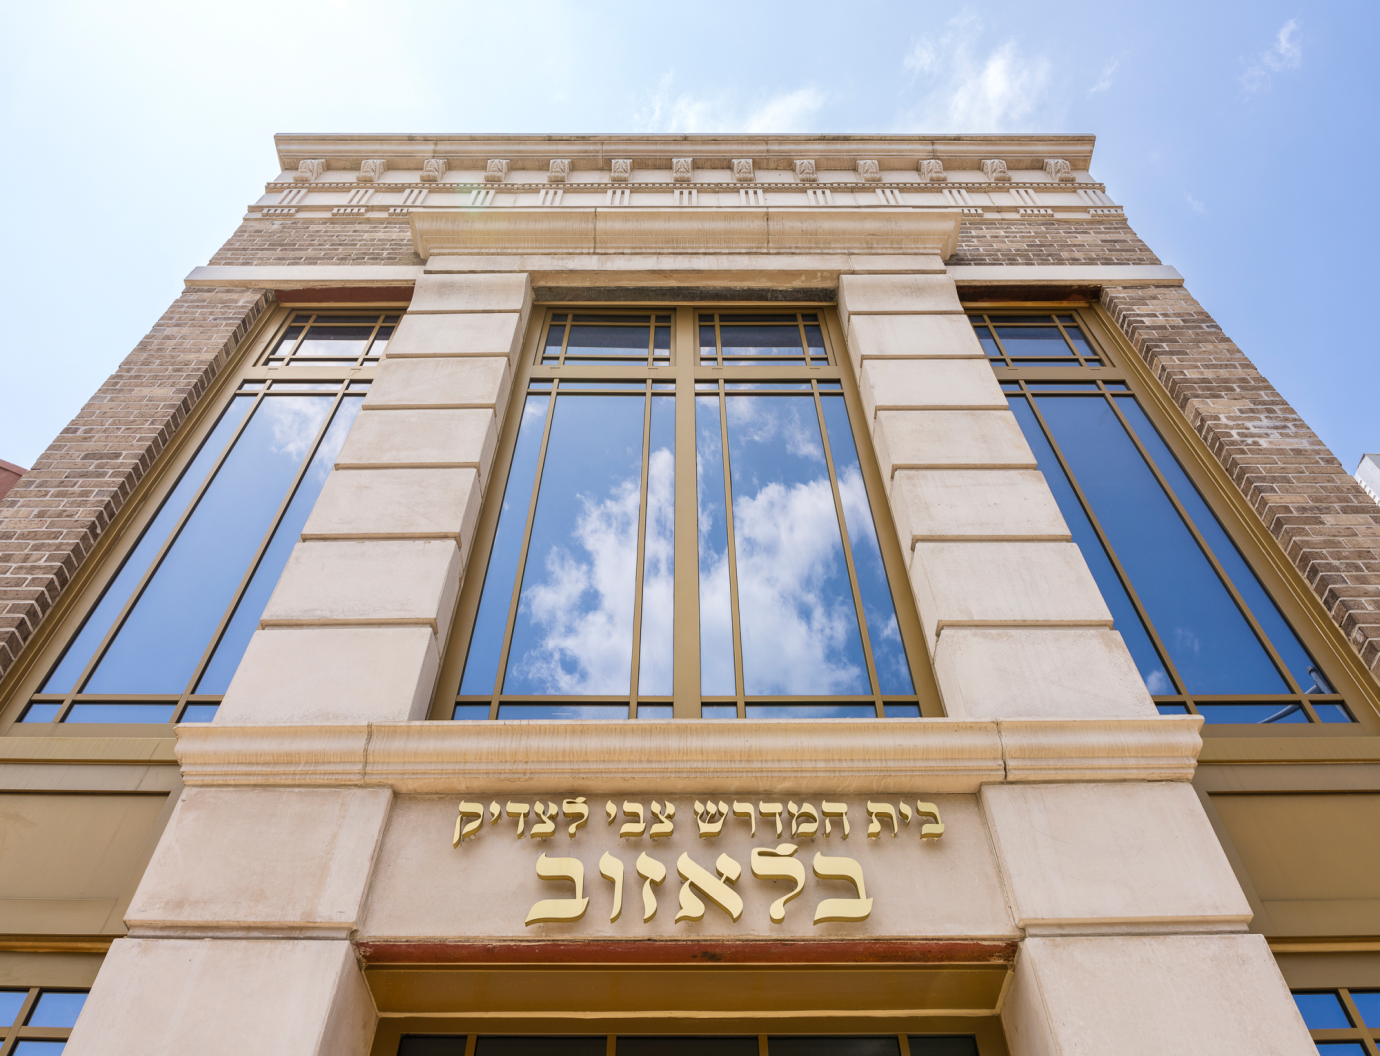 Orthodox Synagogue in Brooklyn 50th street with Wood windows and doors with aluminum clad